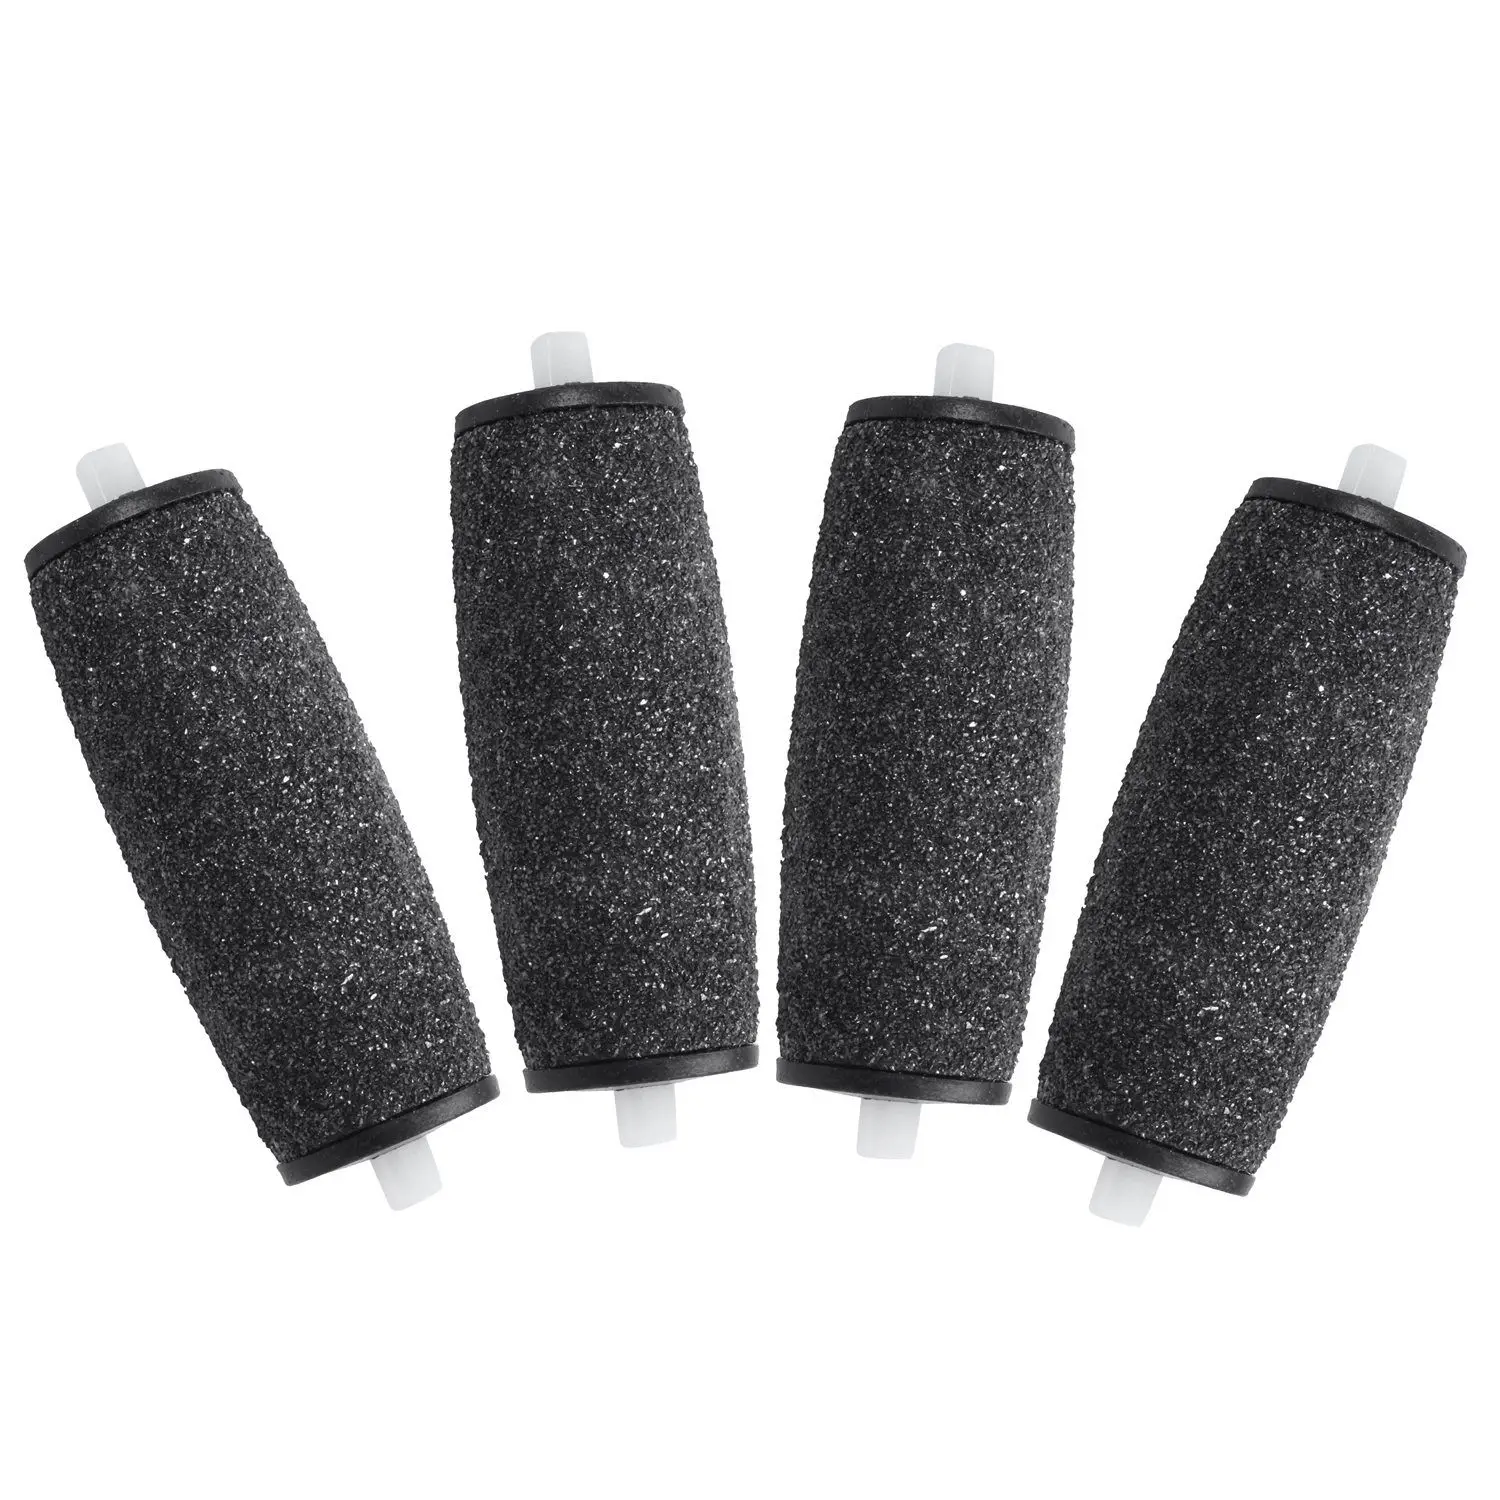 

4Pcs/Lot Replacement Roller Heads For Velvet Smooth Electric Foot File Pedicure Machine Dead Skin Callus Remover Foot Care Tool